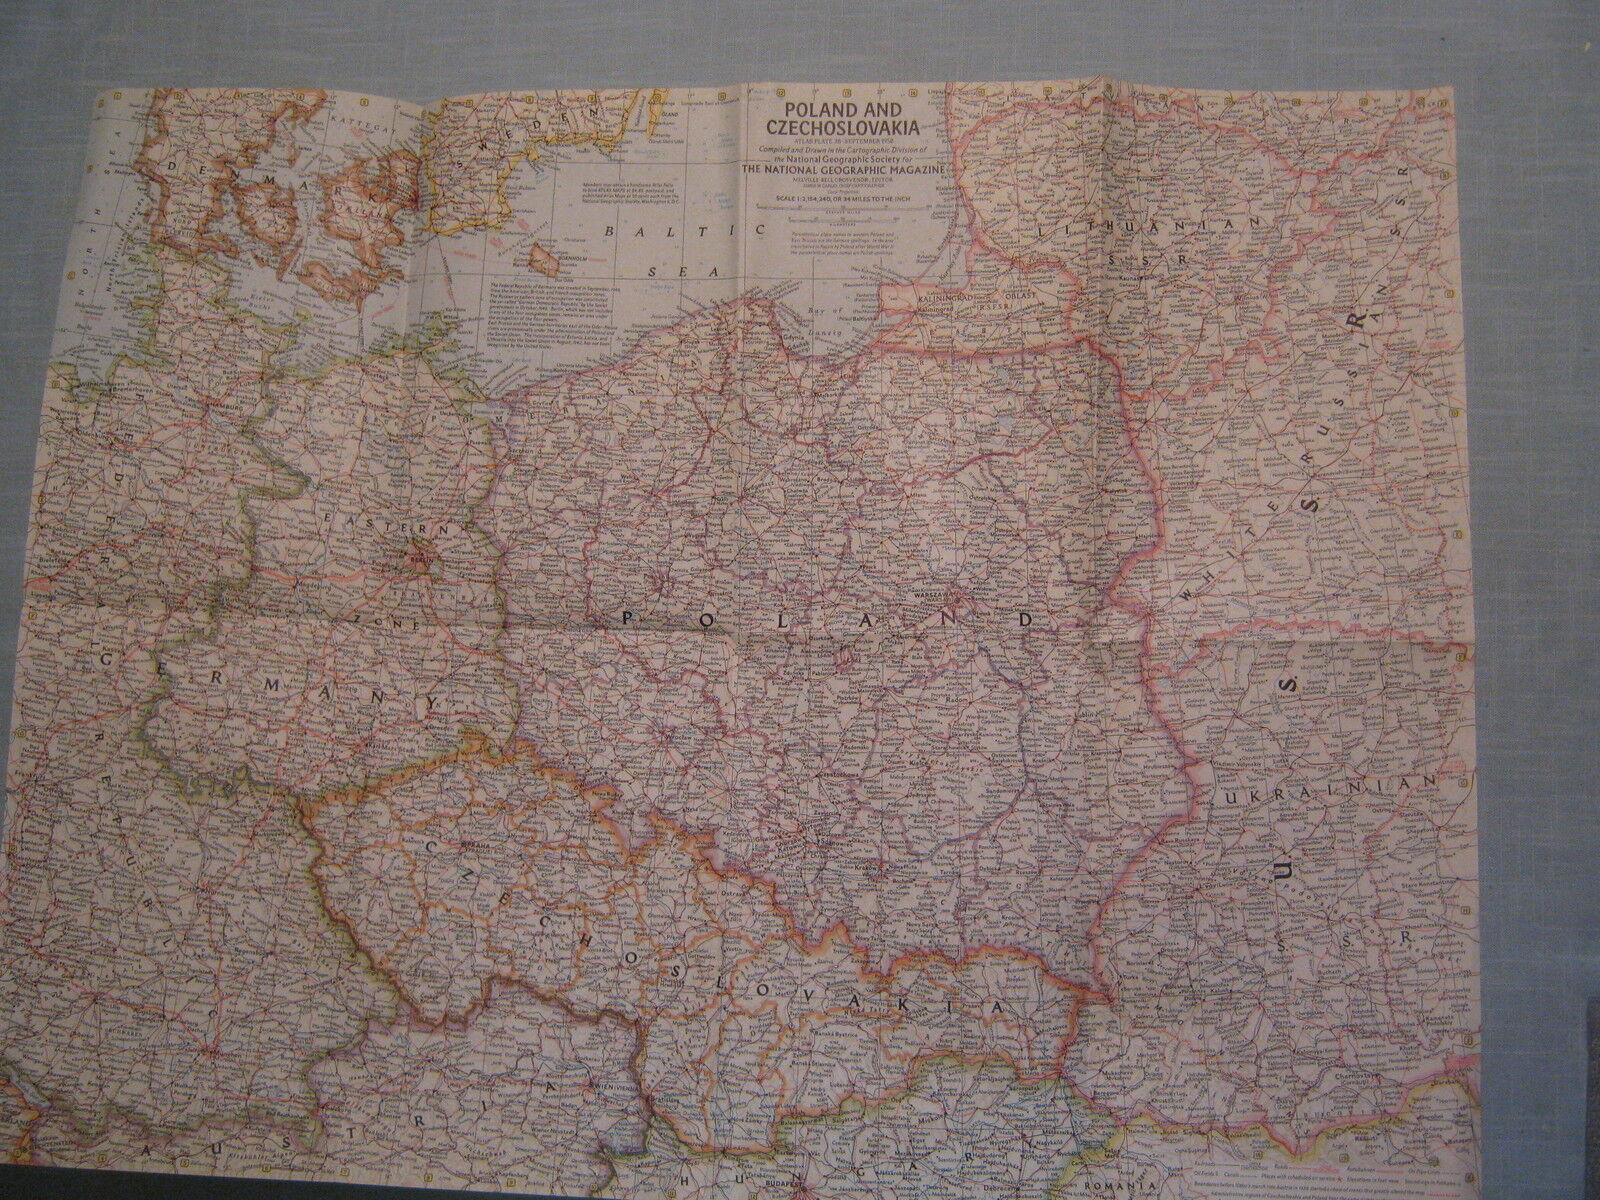 VINTAGE POLAND AND CZECHOSLOVAKIA MAP National Geographic September 1958